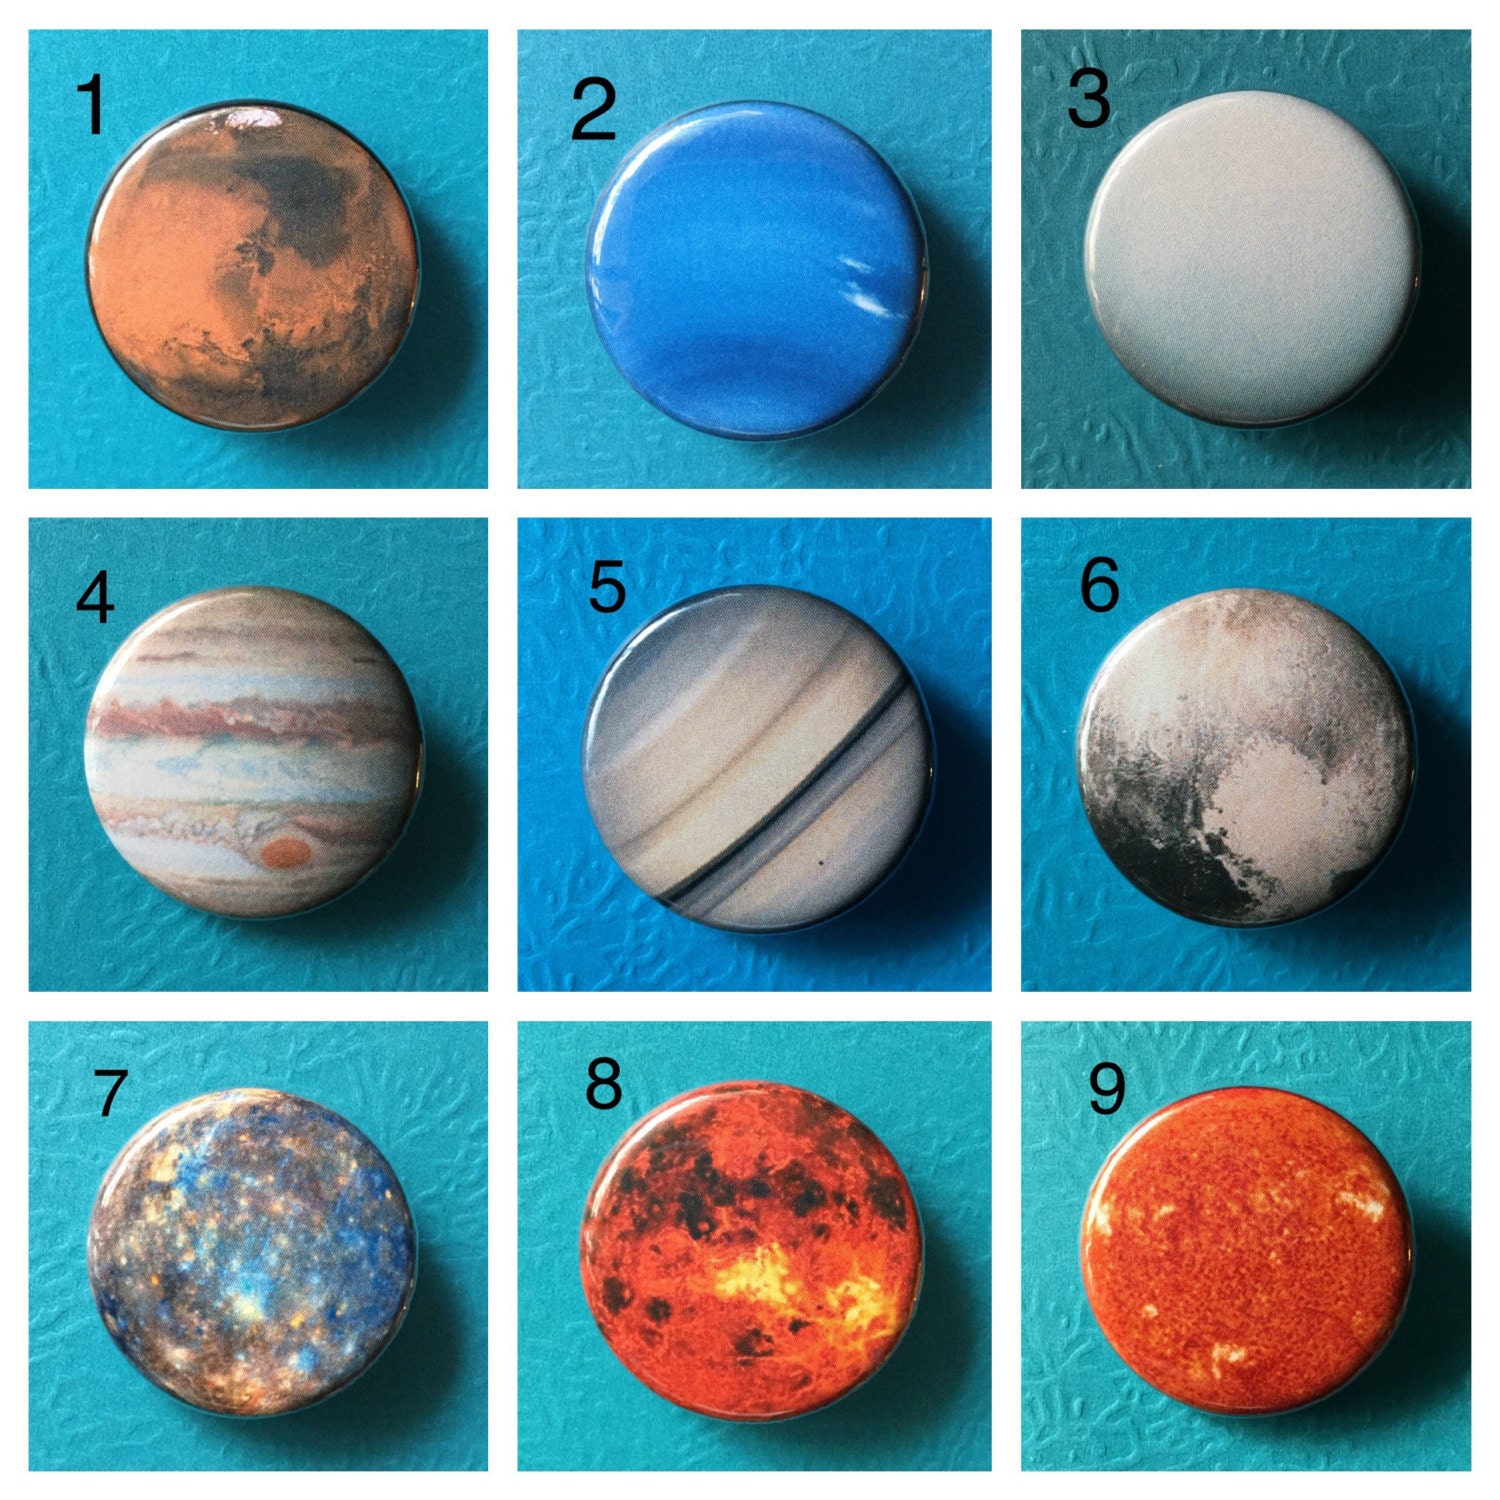 Planet buttons / Planet fridge magnets / Astronomy buttons